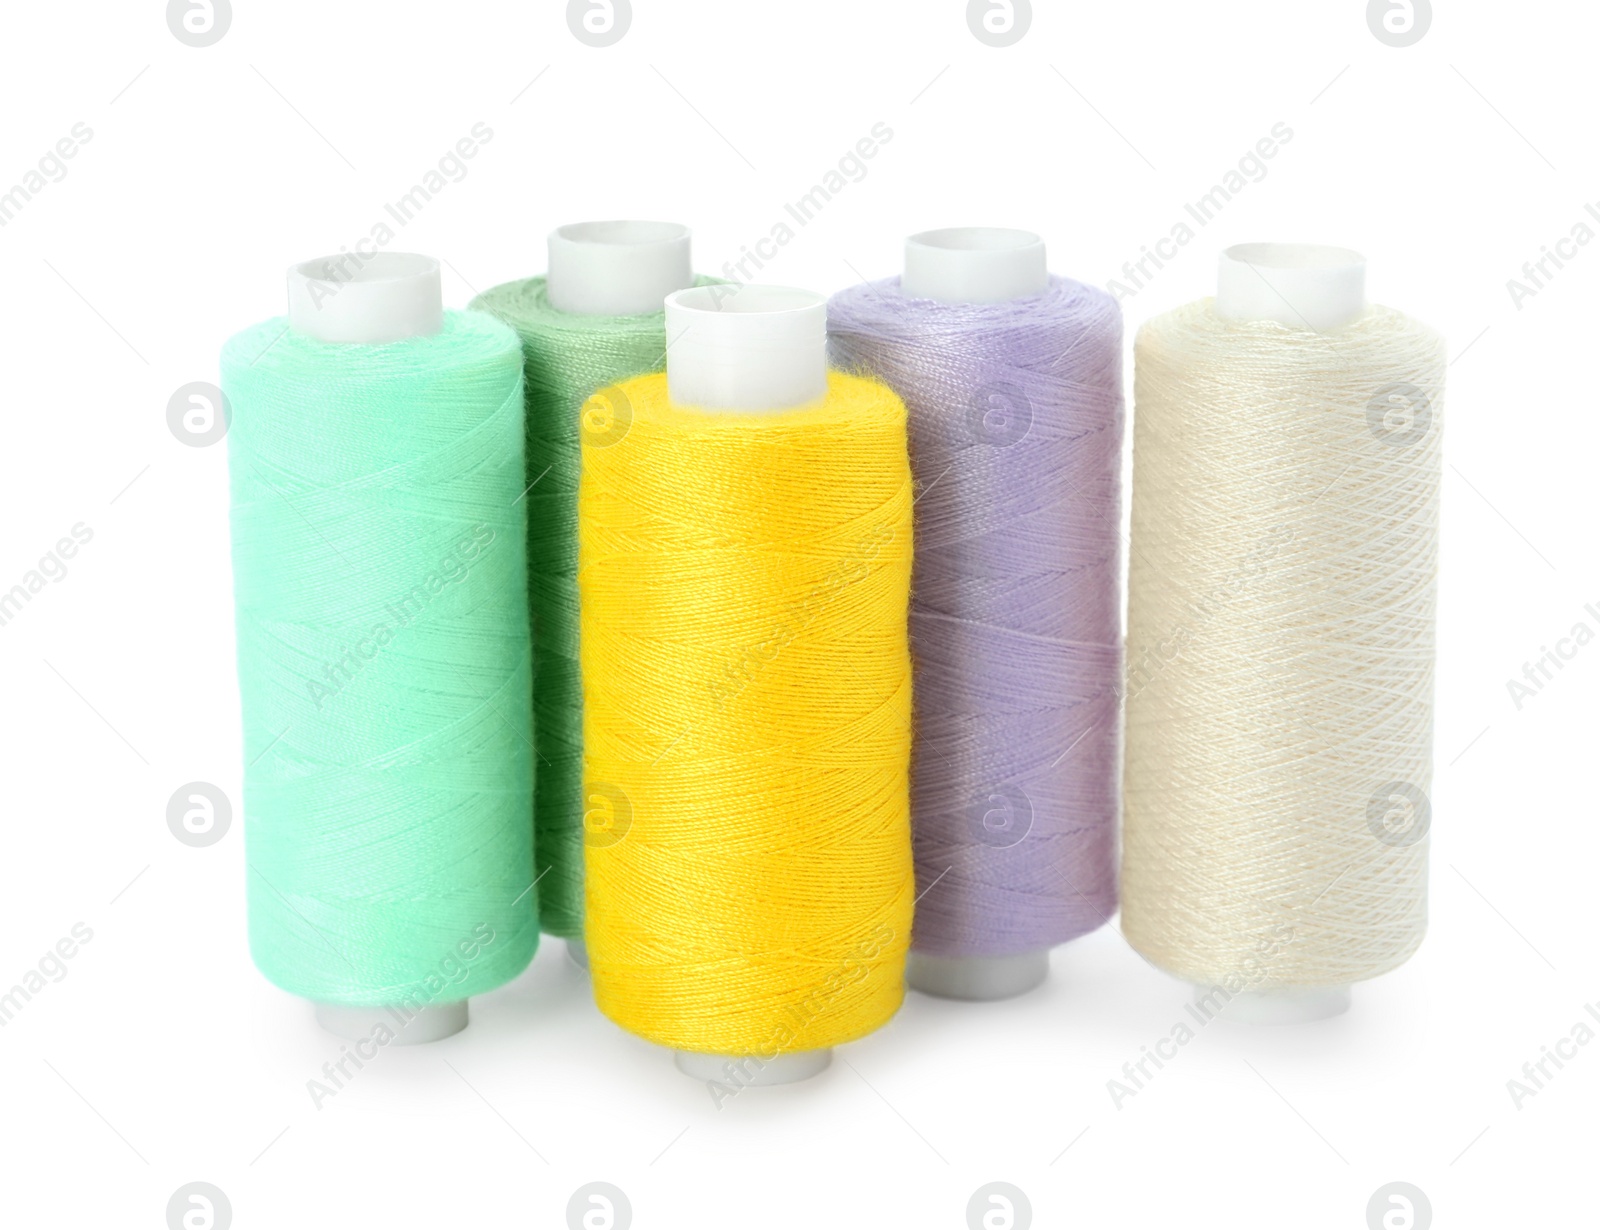 Photo of Set of different colorful sewing threads on white background